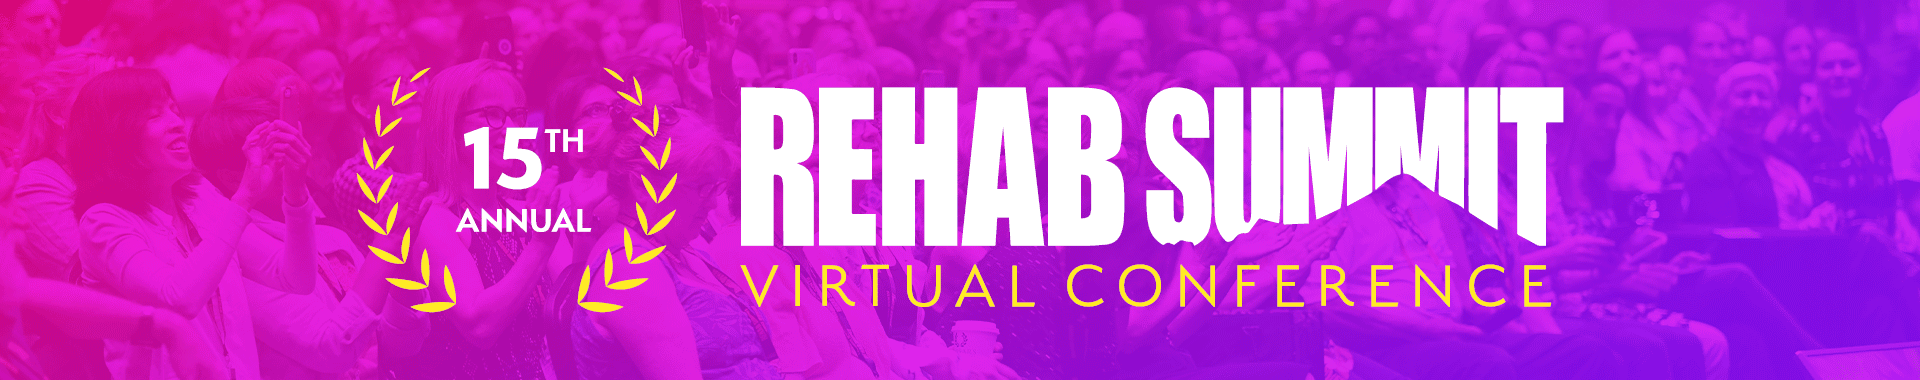 15th Annual Rehab Summit Conference Recording Package